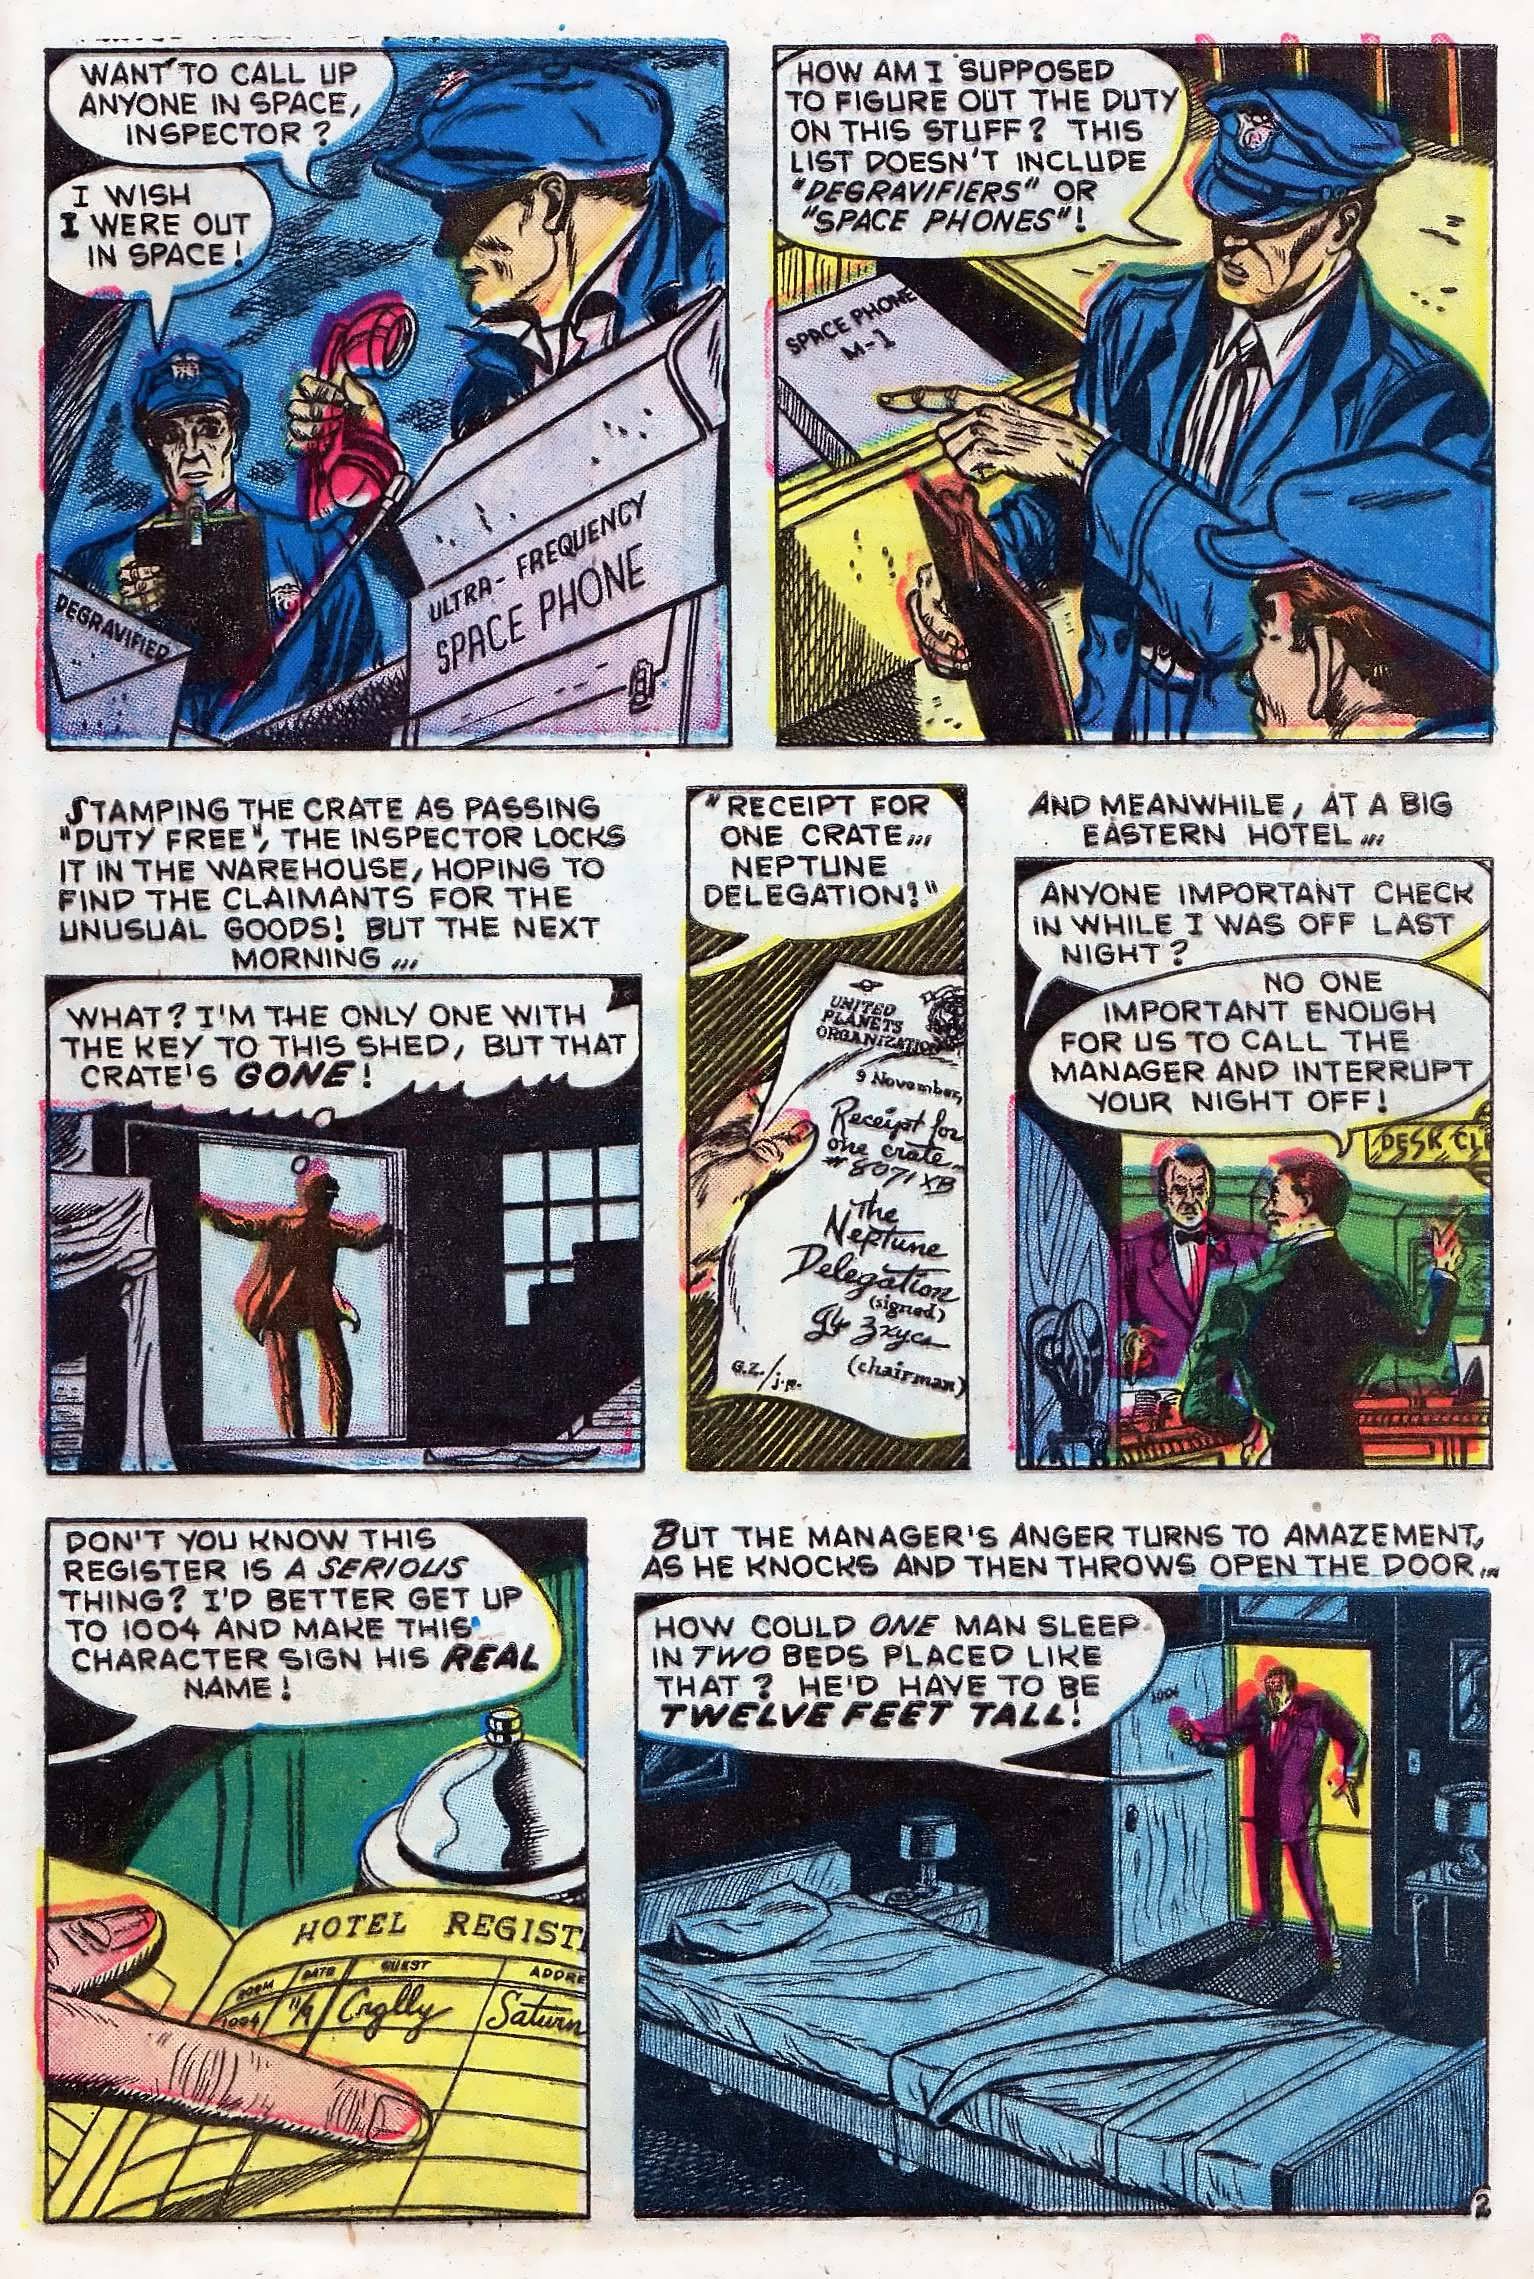 Marvel Tales (1949) 142 Page 28